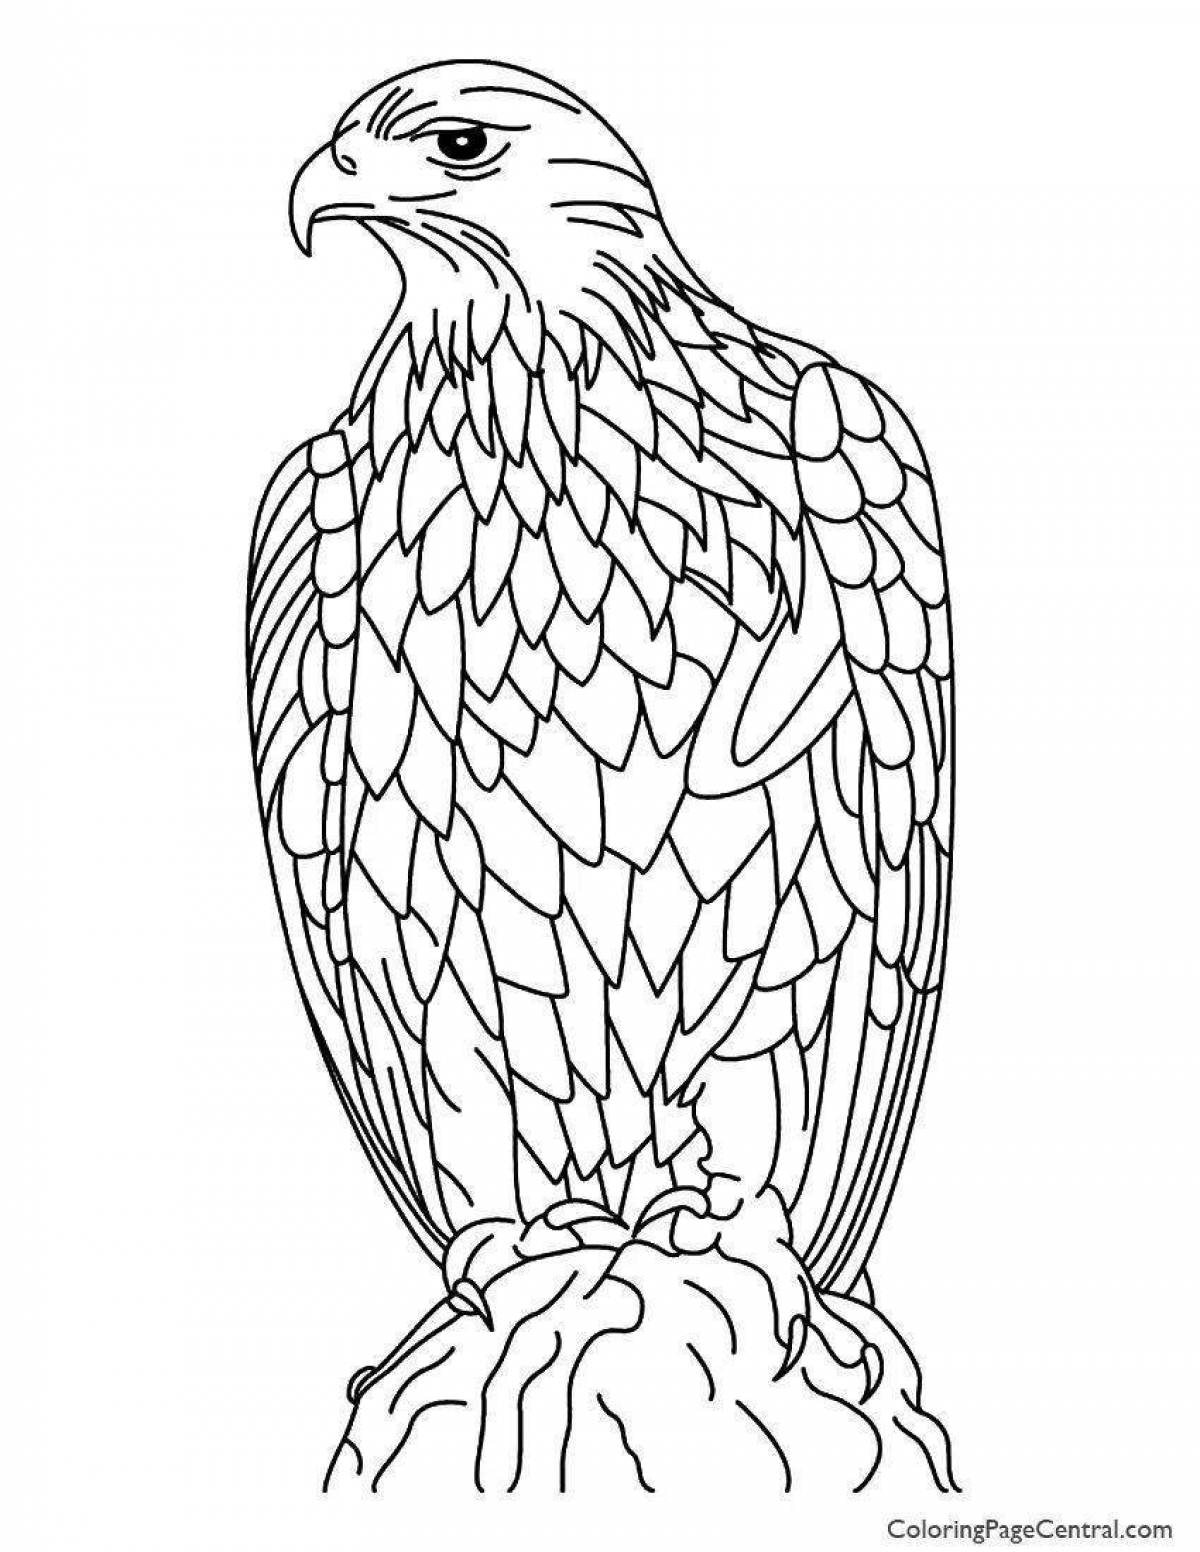 Glorious eagle coloring book for kids